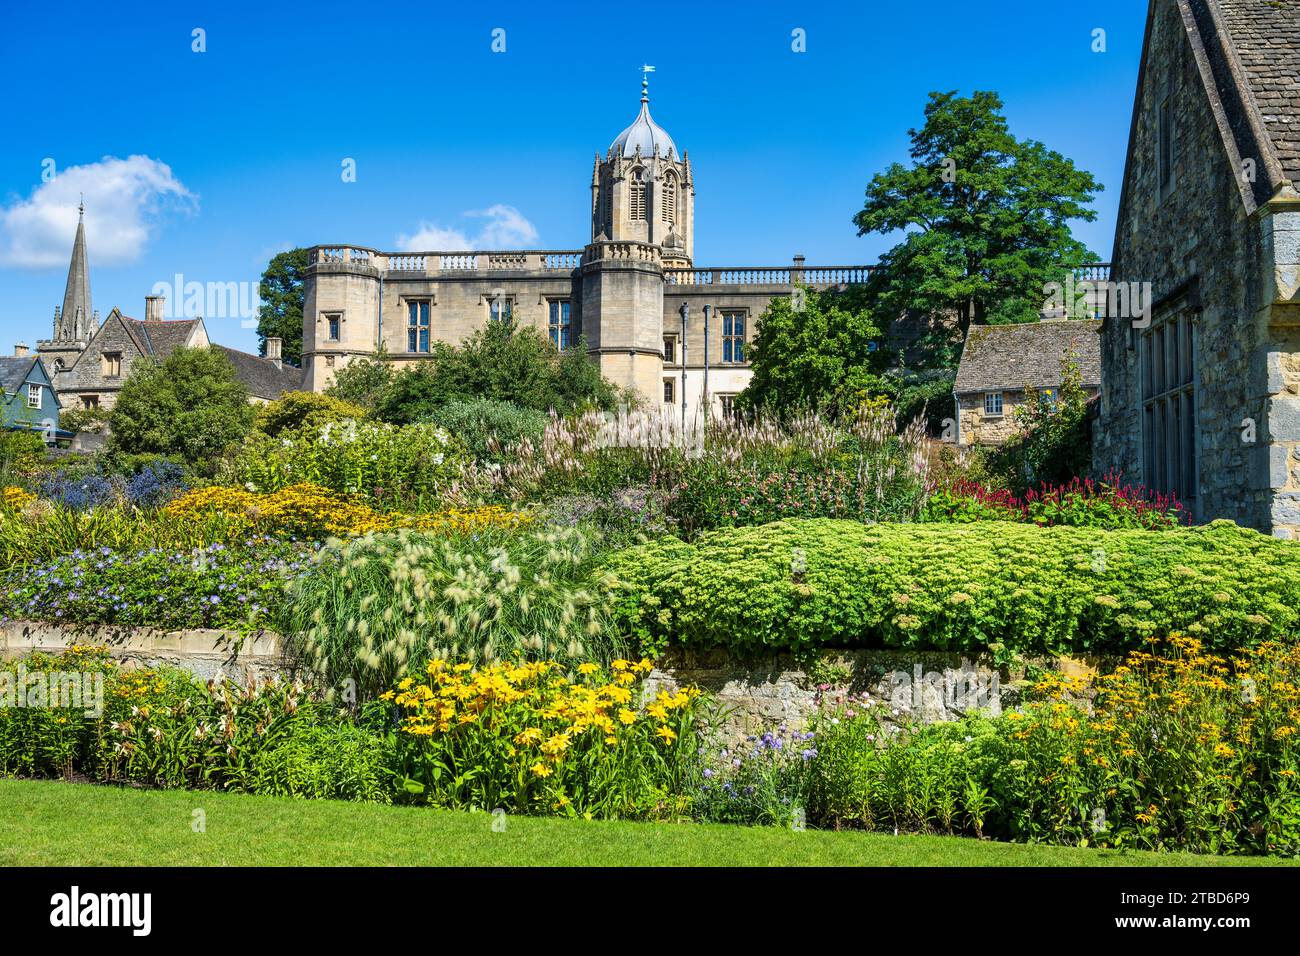 Garden on Broad Walk with Tom Tower of Christ Church College, University of Oxford, in background a Oxford City Centre, Oxfordshire, Inghilterra, Regno Unito Foto Stock